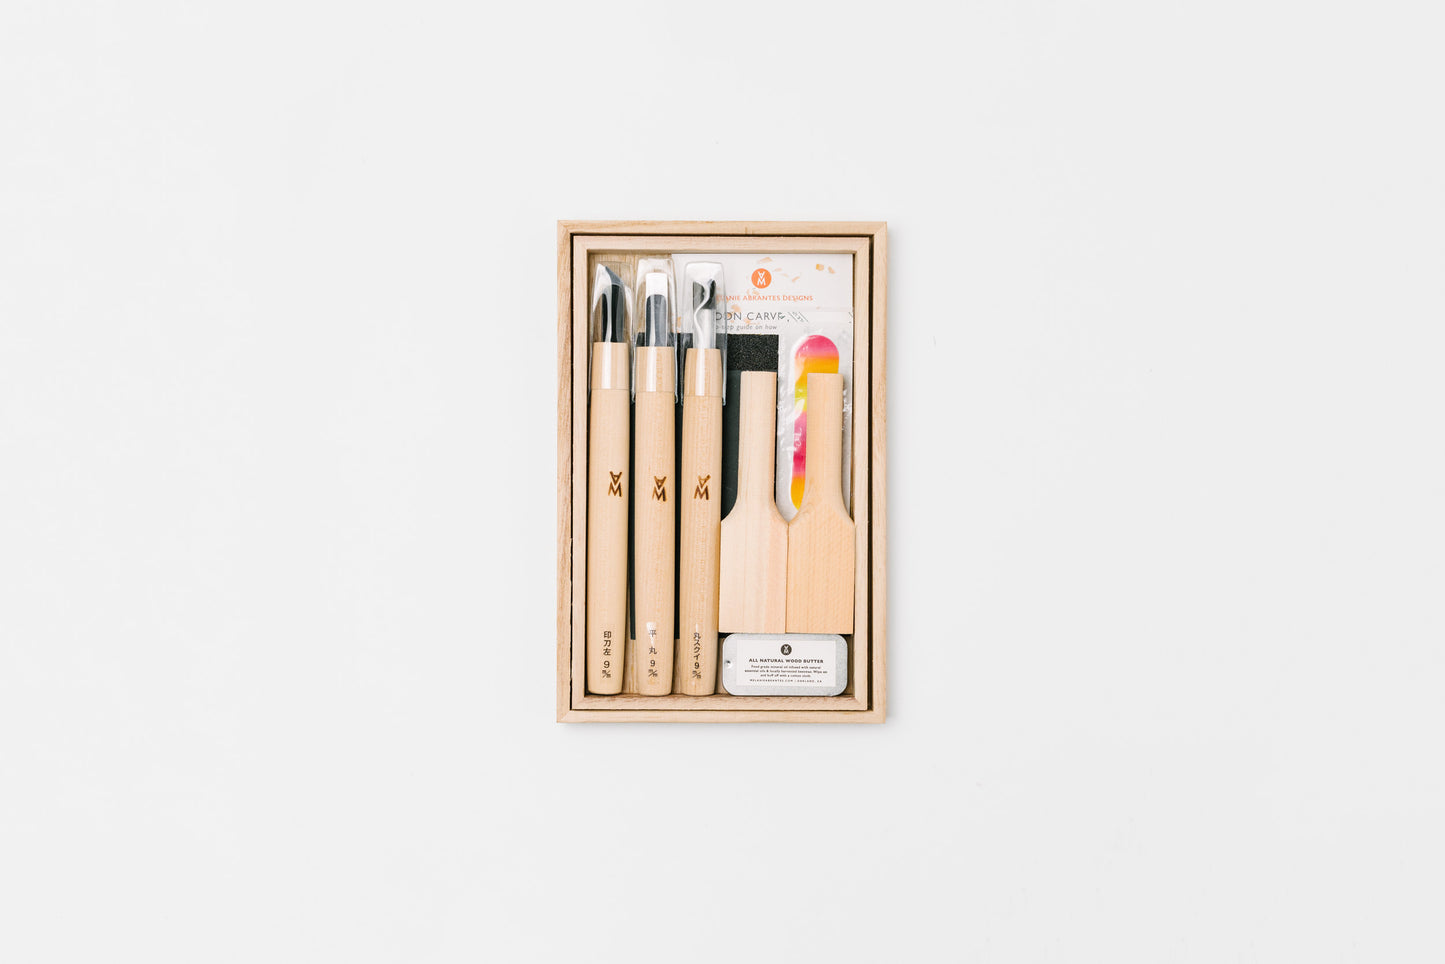 Japanese Spoon Carving Kit – Craft Contemporary Shop